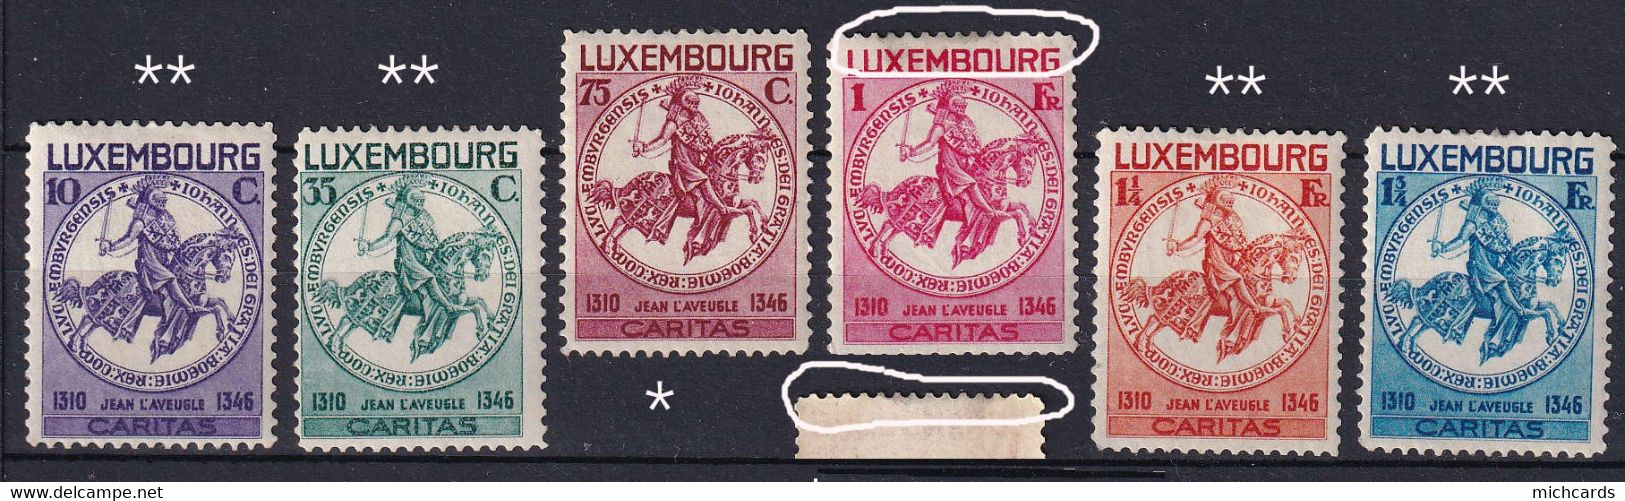 245 LUXEMBOURG 1934 - Y&T 252/53 Et 256/57 Neuf ** MNH - 254/55 Neuf * MLH - Caritas Cheval - 1926-39 Charlotte Right-hand Side